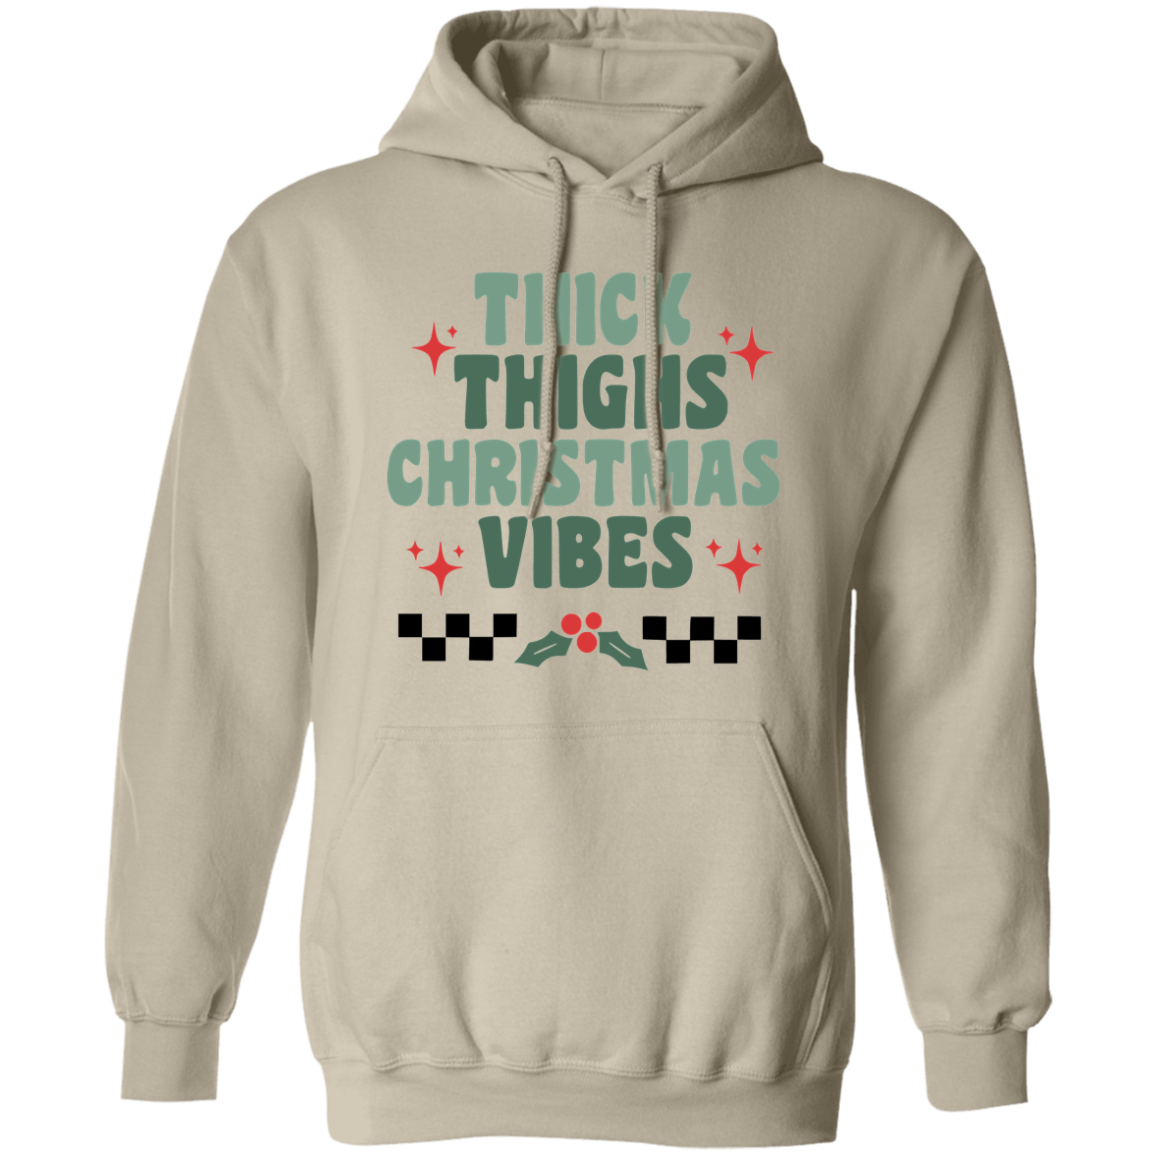 Thick Thighs Pullover Hoodie